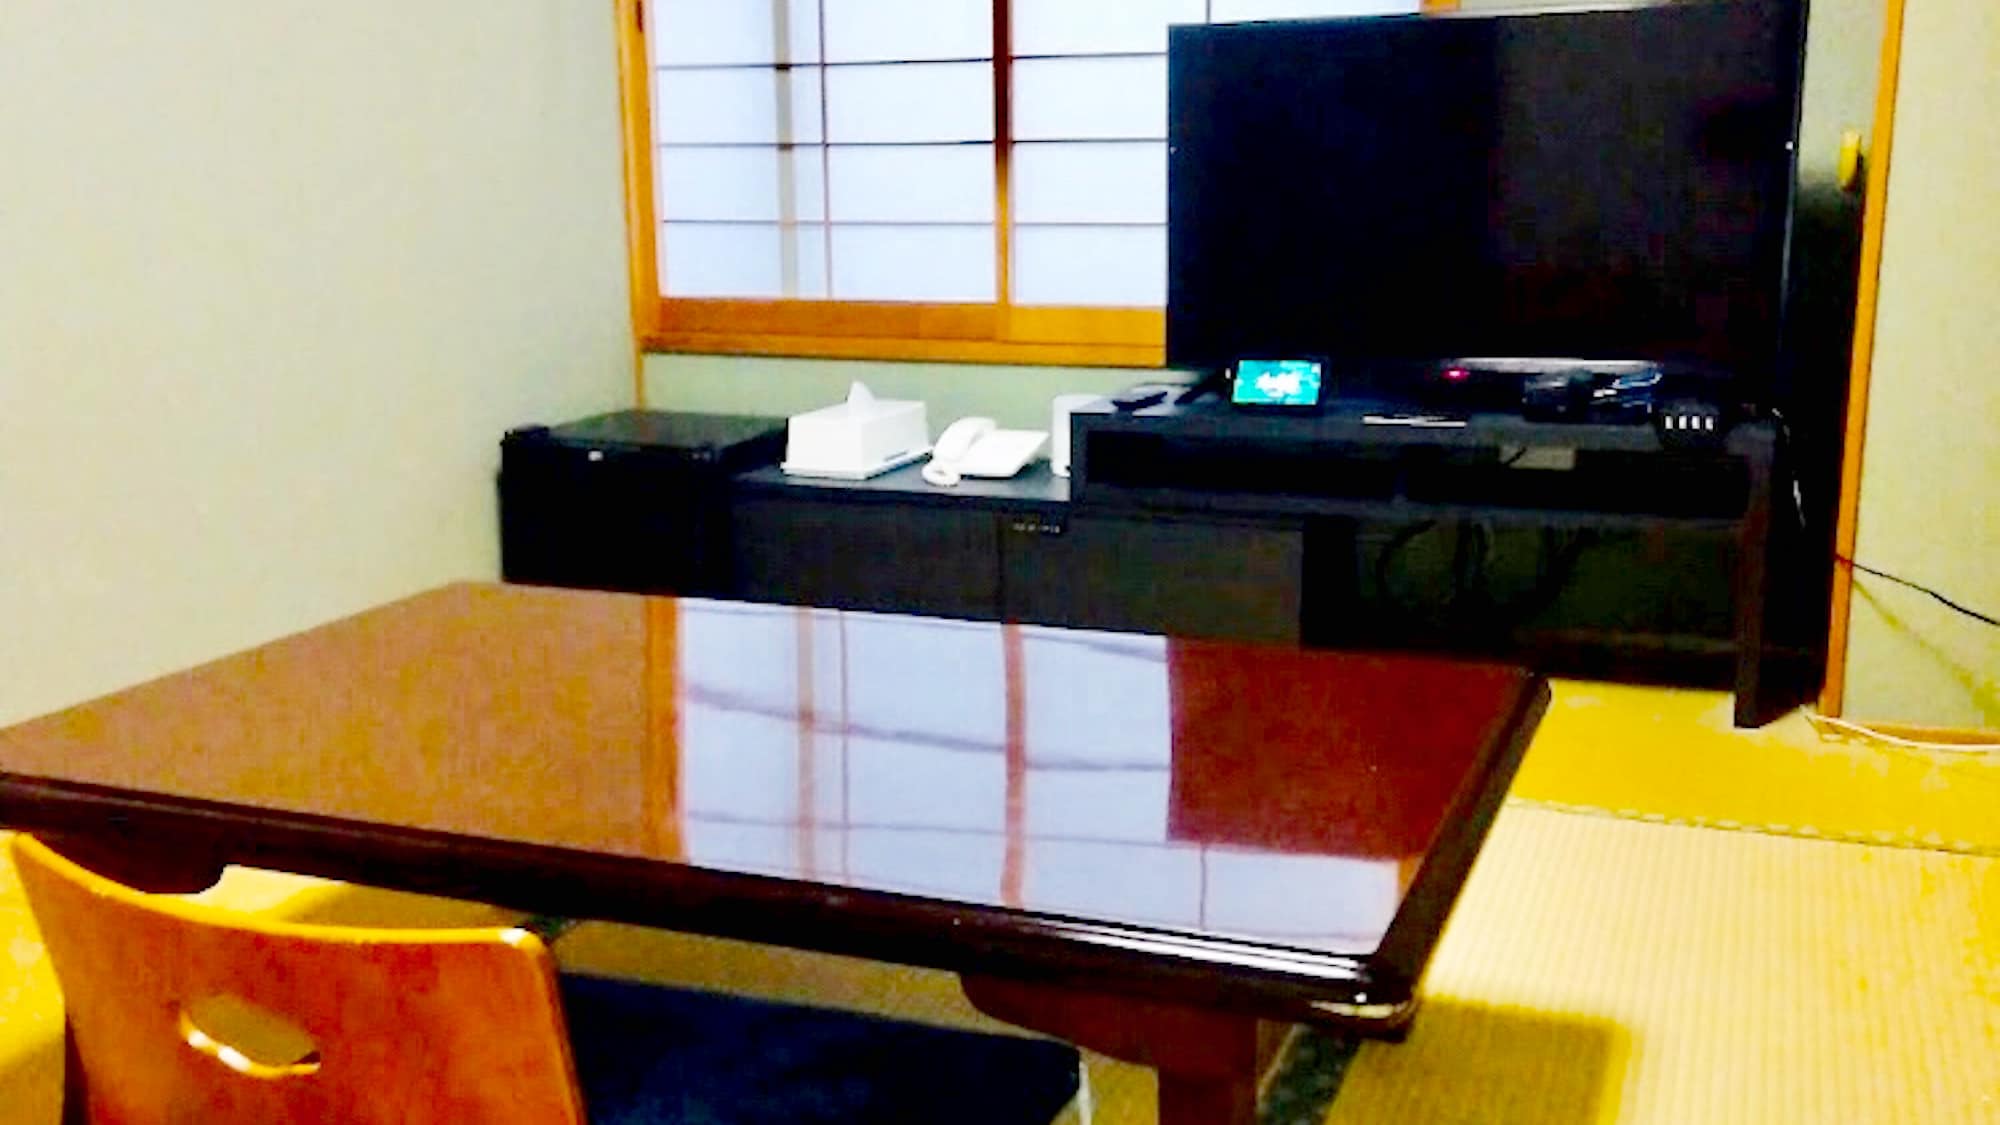 ・ An example of a Japanese-style room with 6 tatami mats